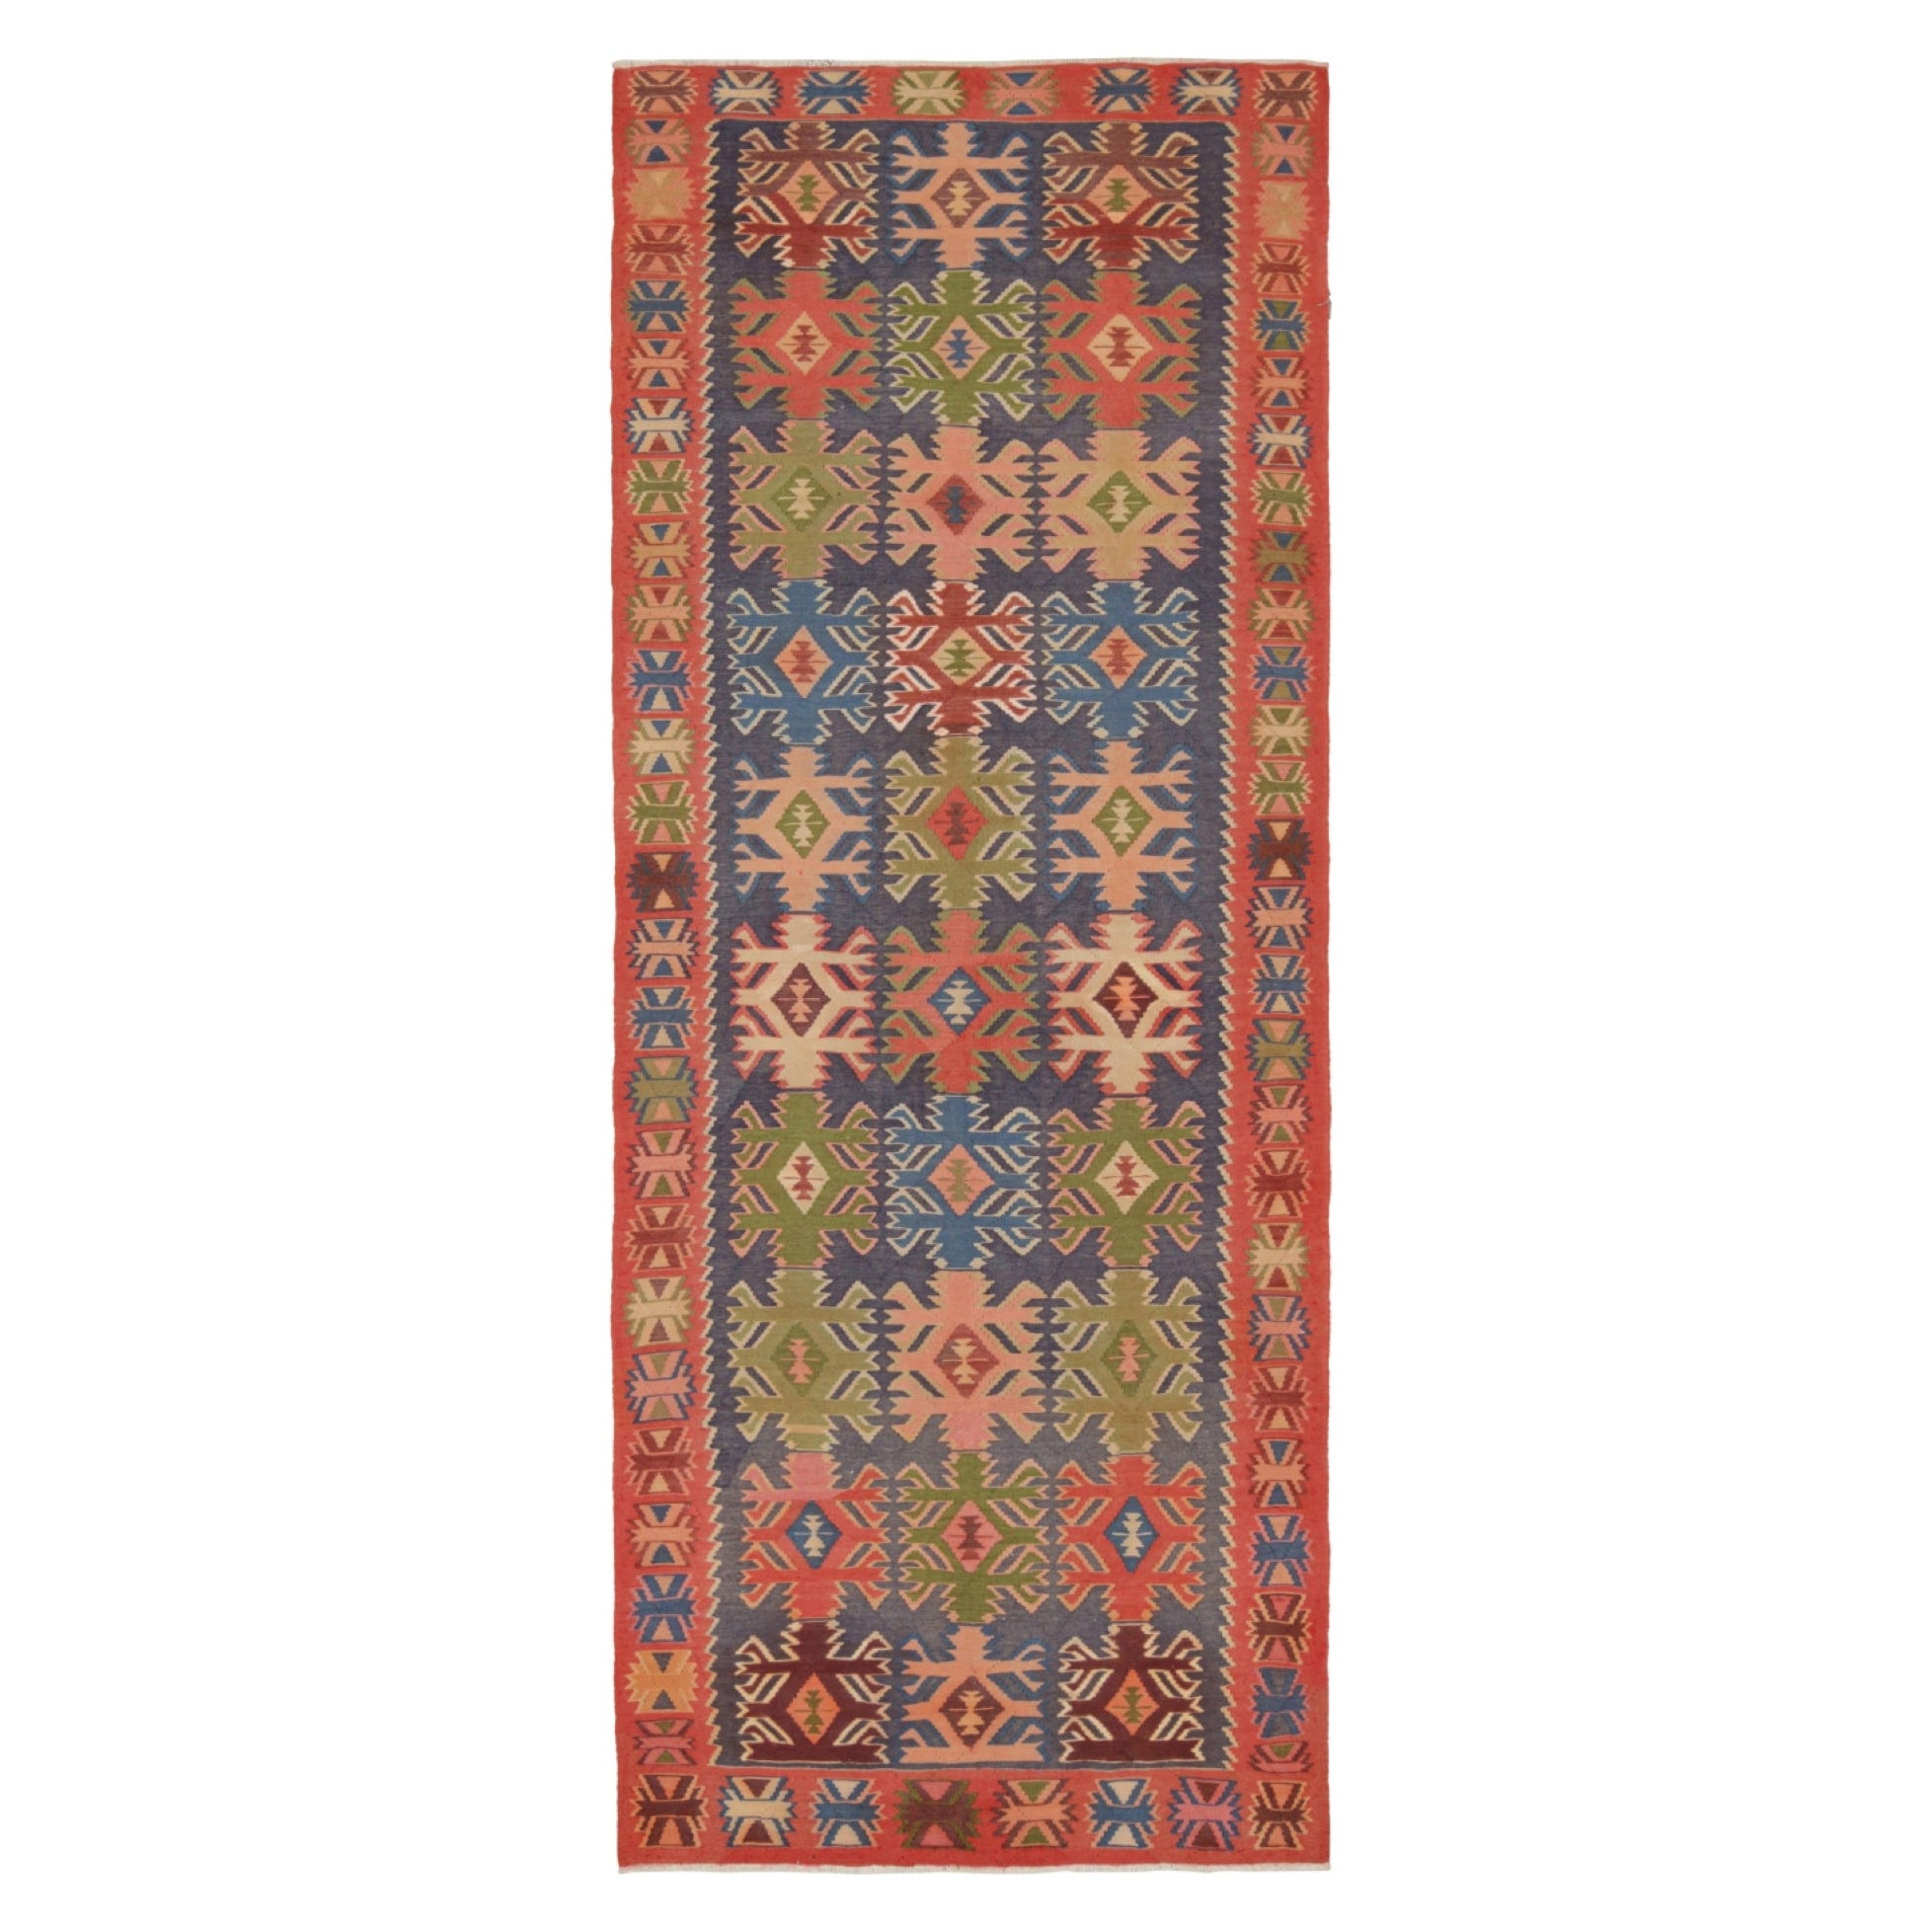 Vintage Northwest Persian Kilim in Blue with Geometric Patterns